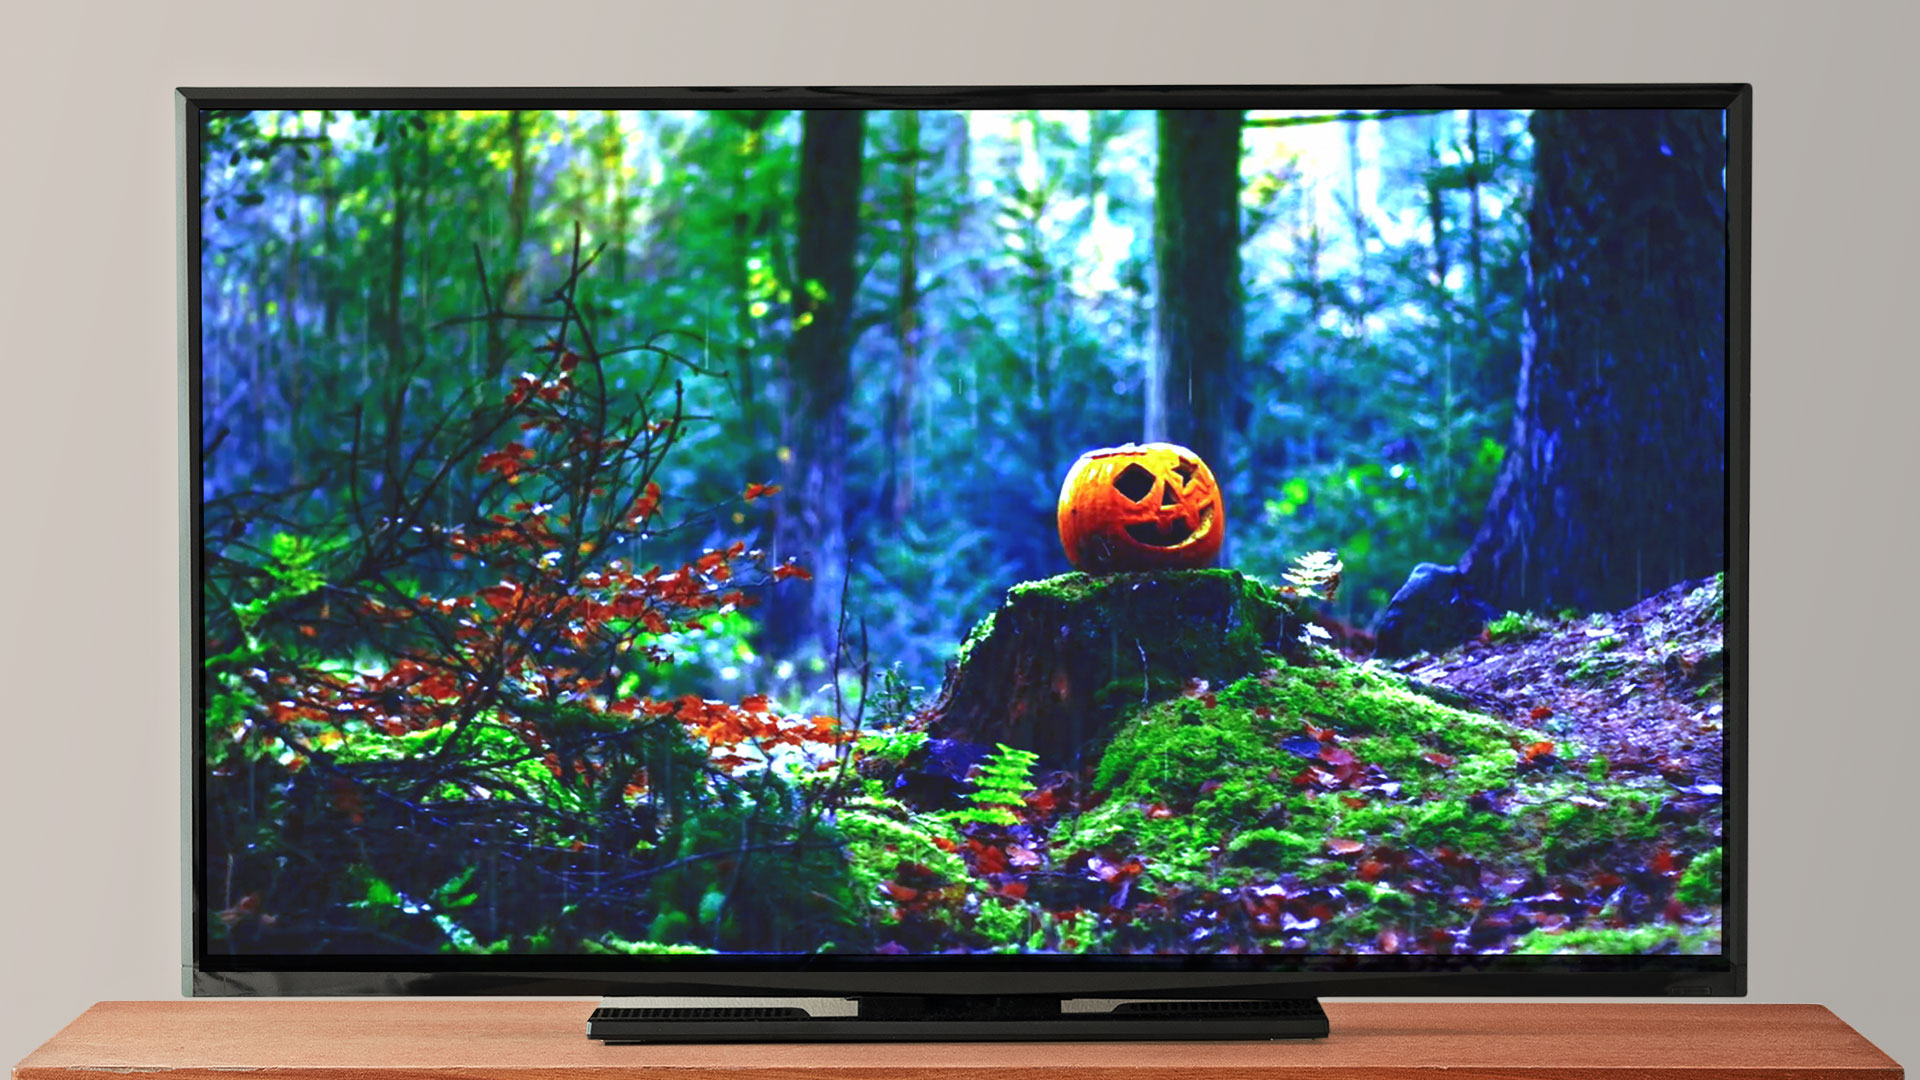 4K Halloween music: Spooky particles, Haunted house, creepy music, Screensaver Background 9 Videos For Tablets And Fire TV - NO ADS